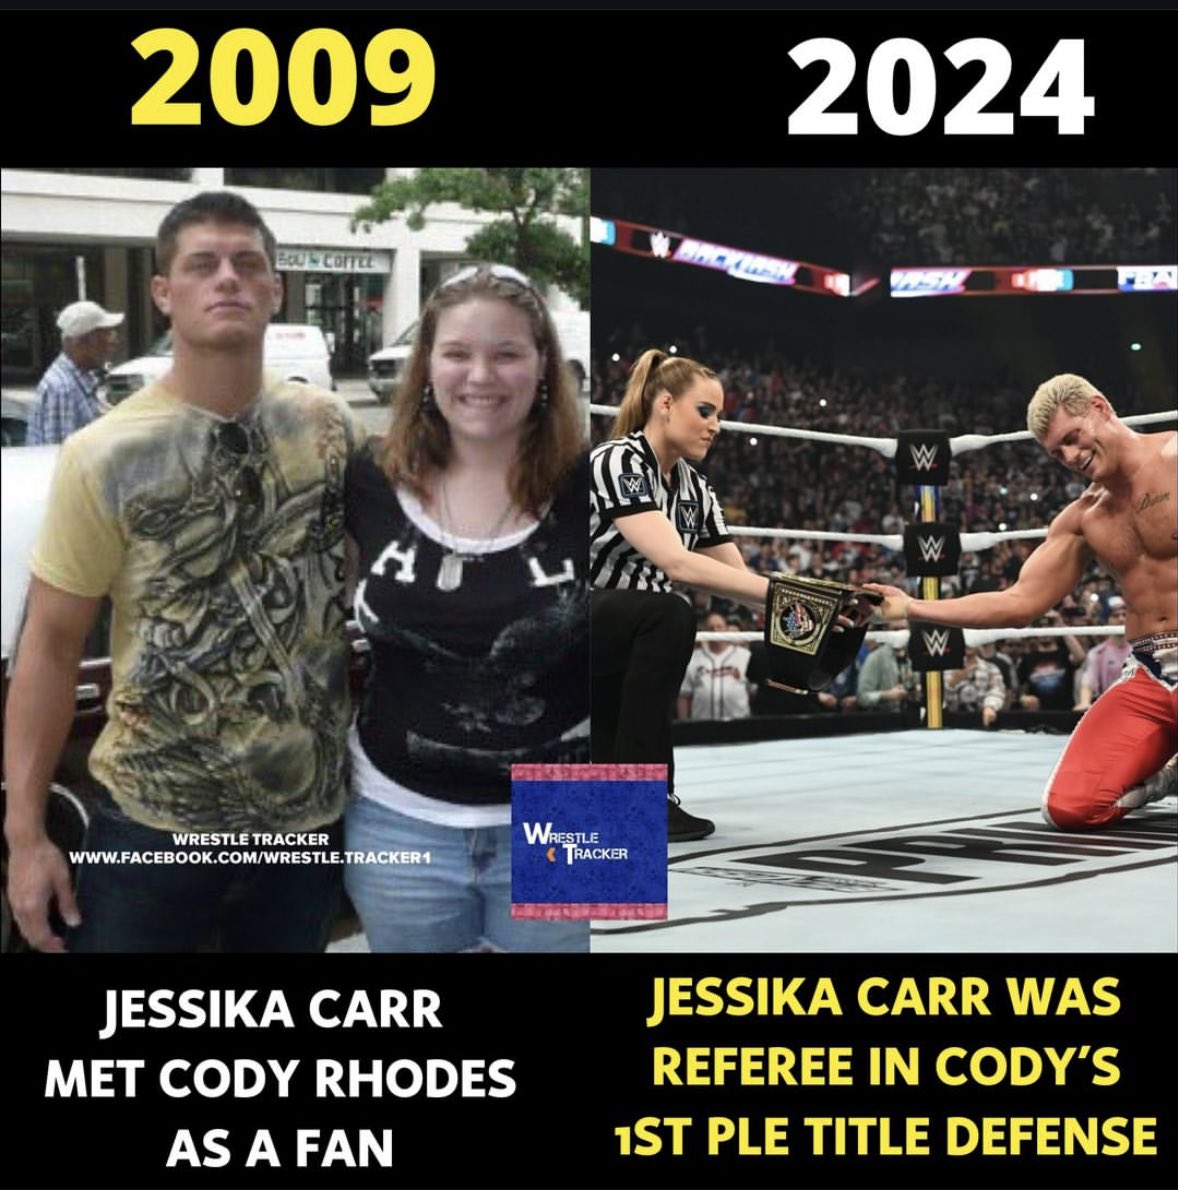 Jessika Carr - What a life! #WWE #CodyRhodes